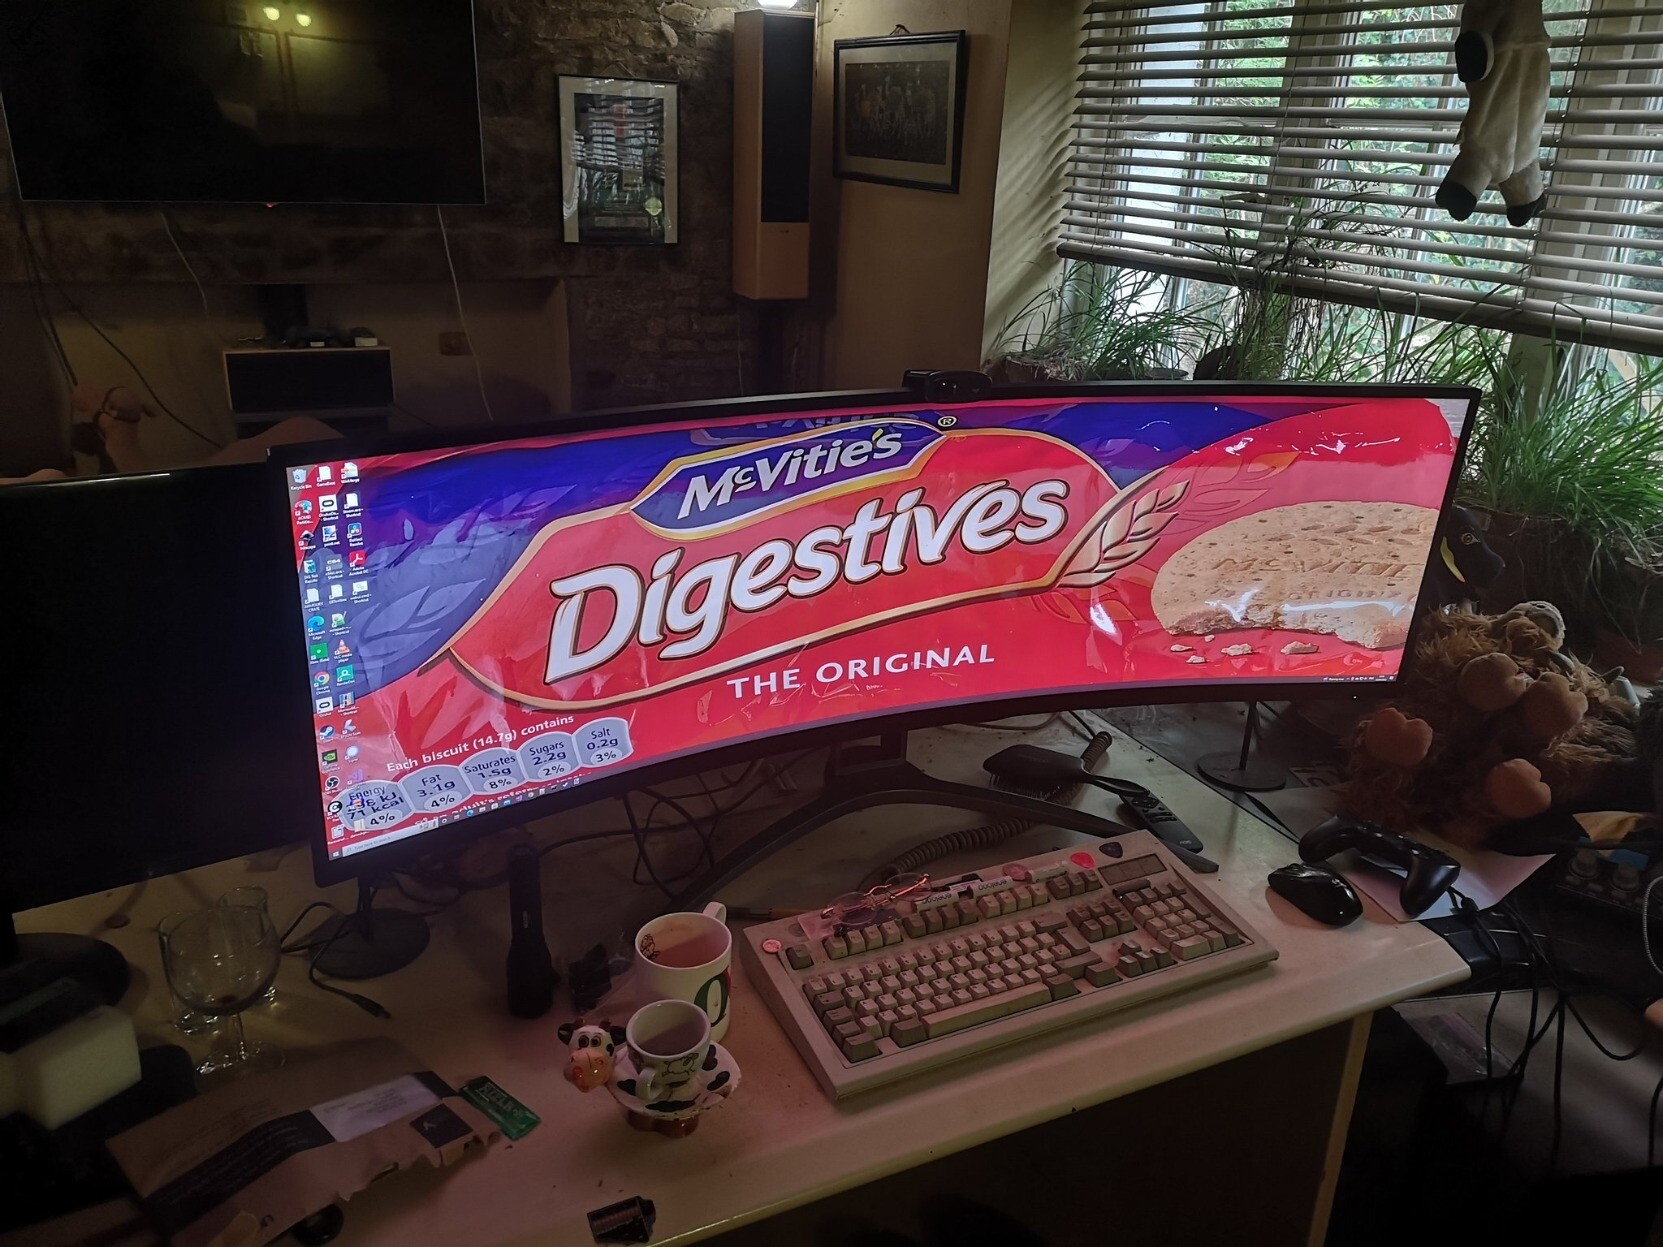 My desk, I have a super wide monitor that has Digestive biscuit packet wallpaper. I might have to change this now that McVities are engaging in price gouging AND shrinkflation at the same time.